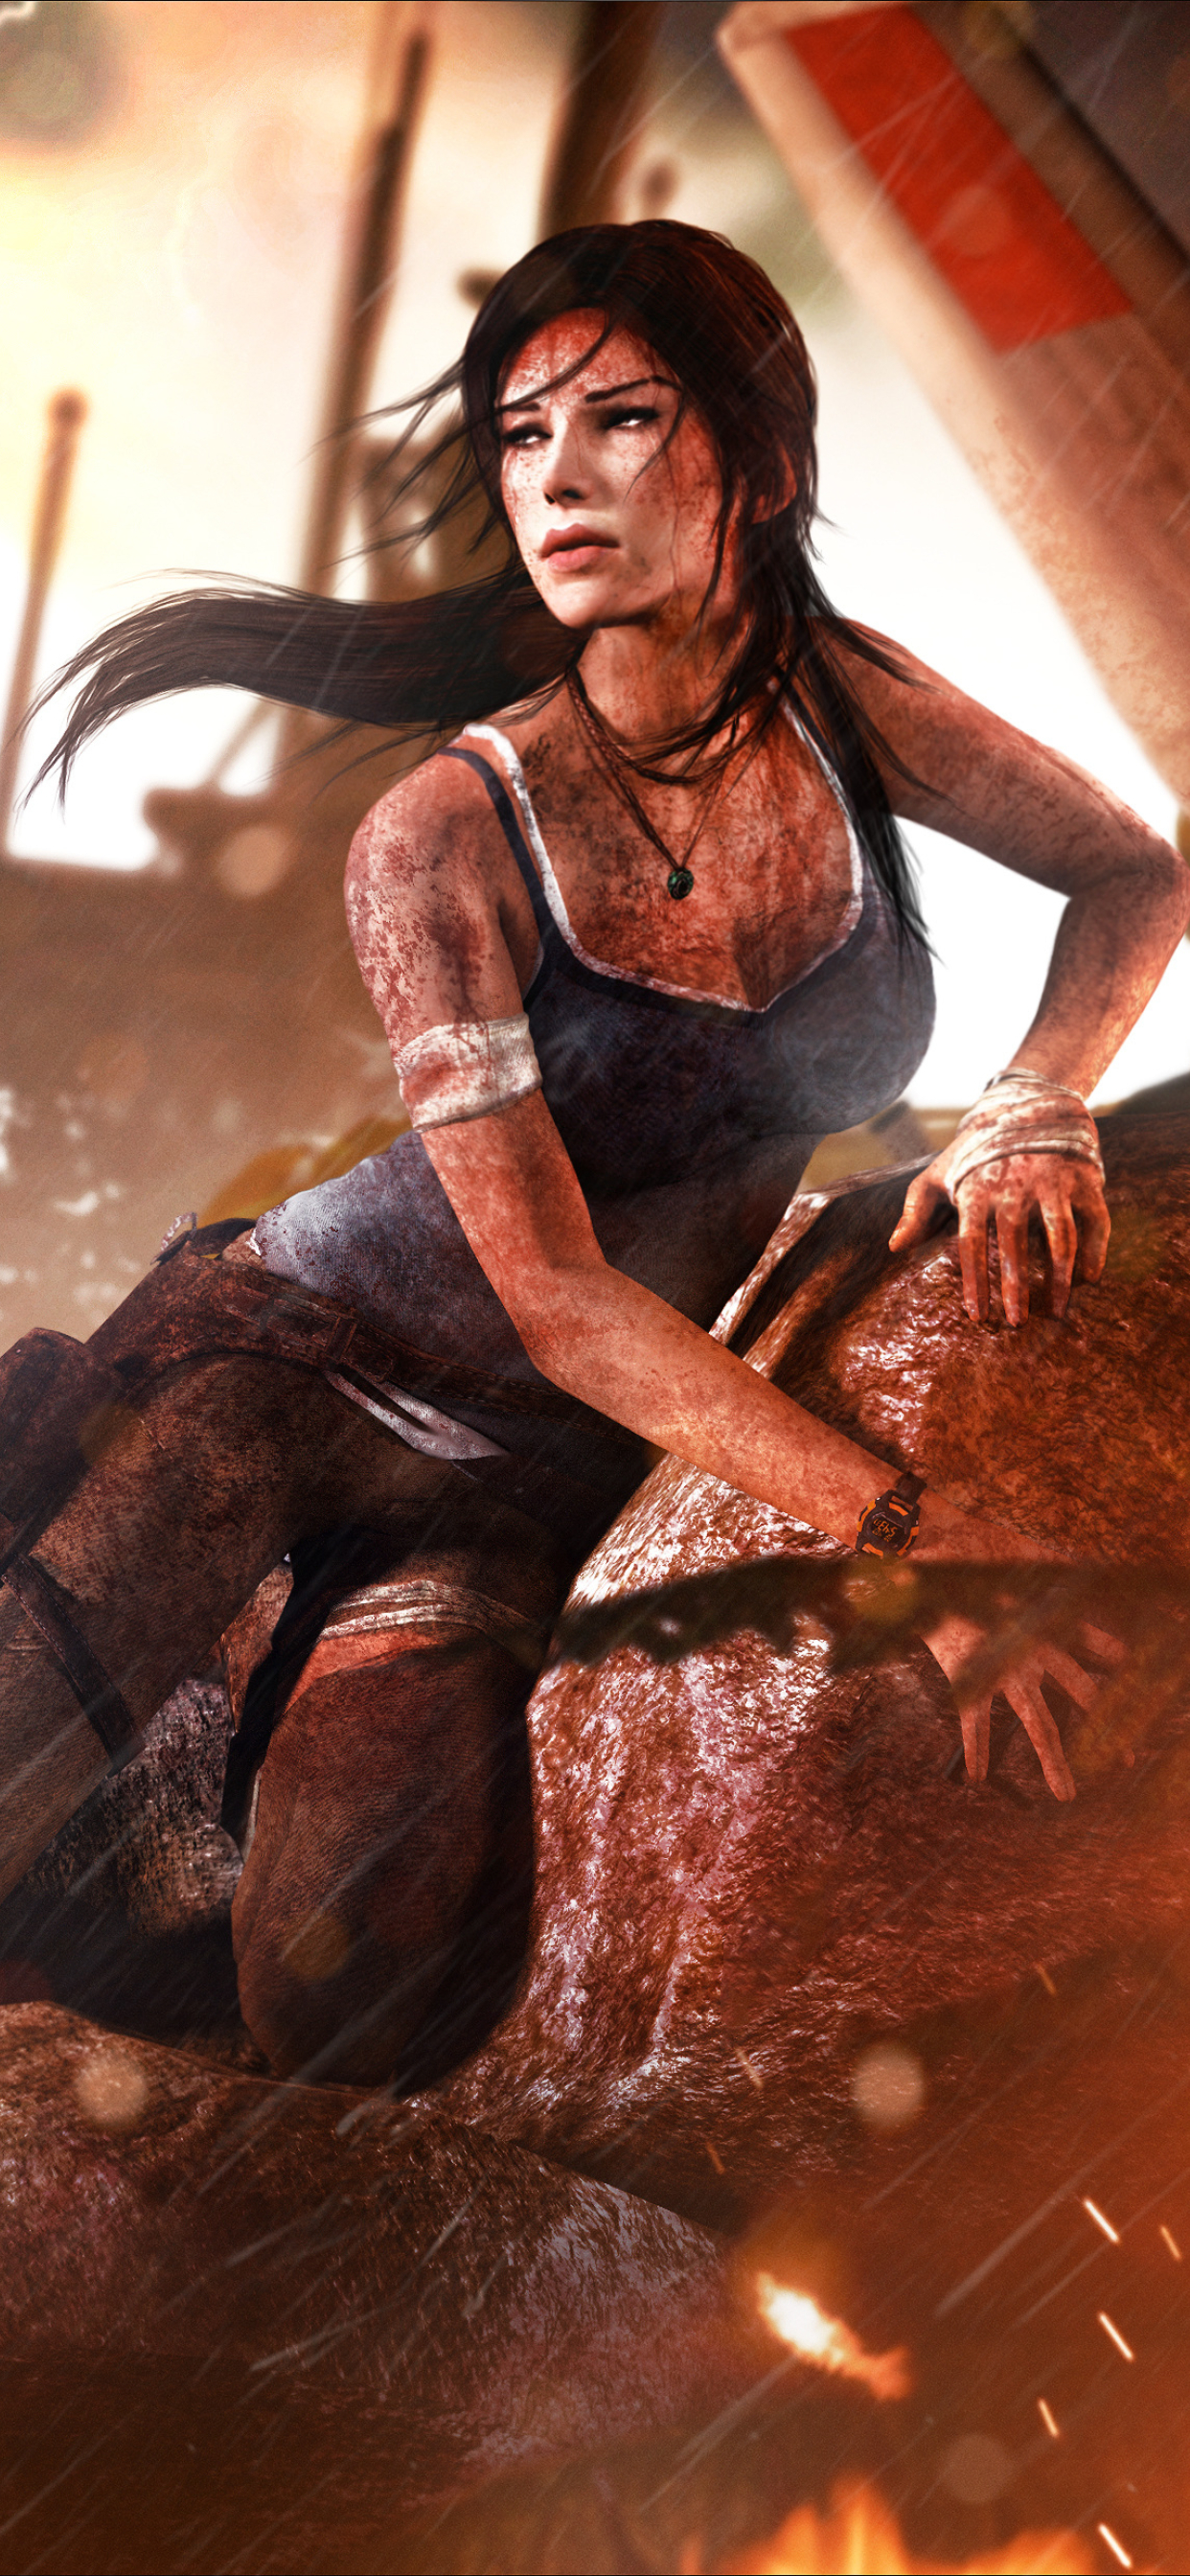 iphone xs max rise of the tomb raider wallpapers